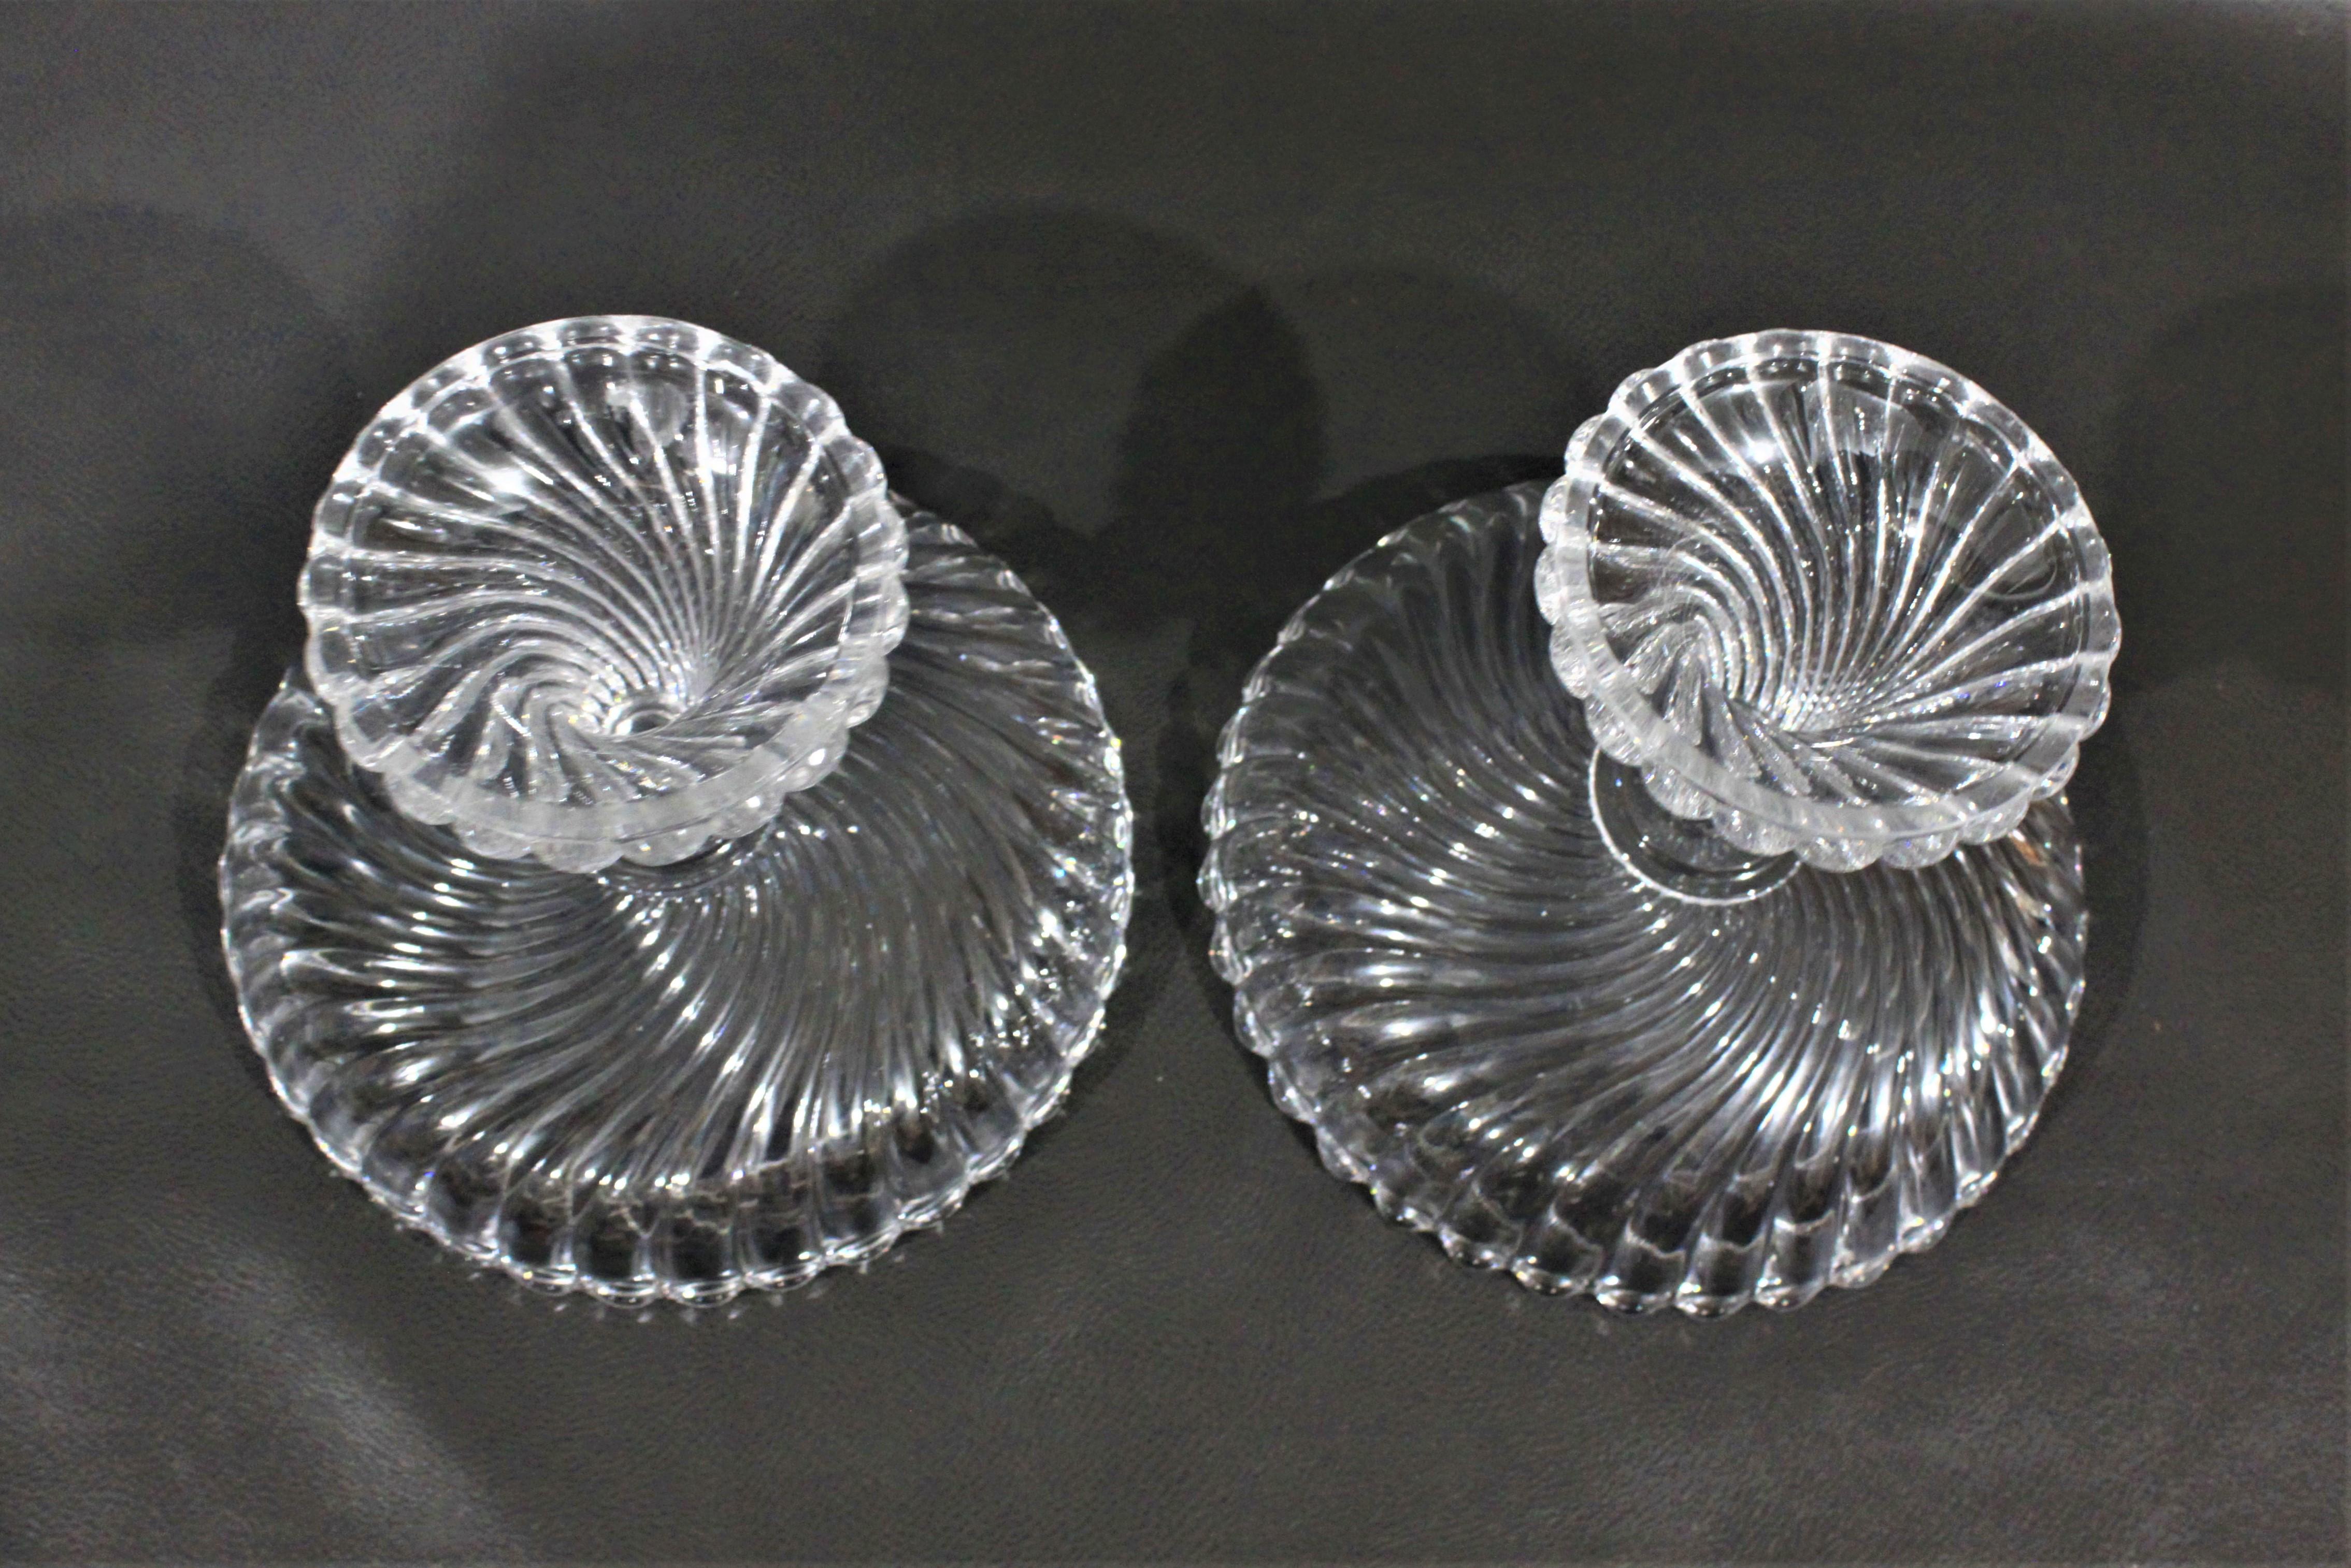 Baccarat Swirled Crystal Pedestal Serving Stand Set In Good Condition For Sale In Hamilton, Ontario